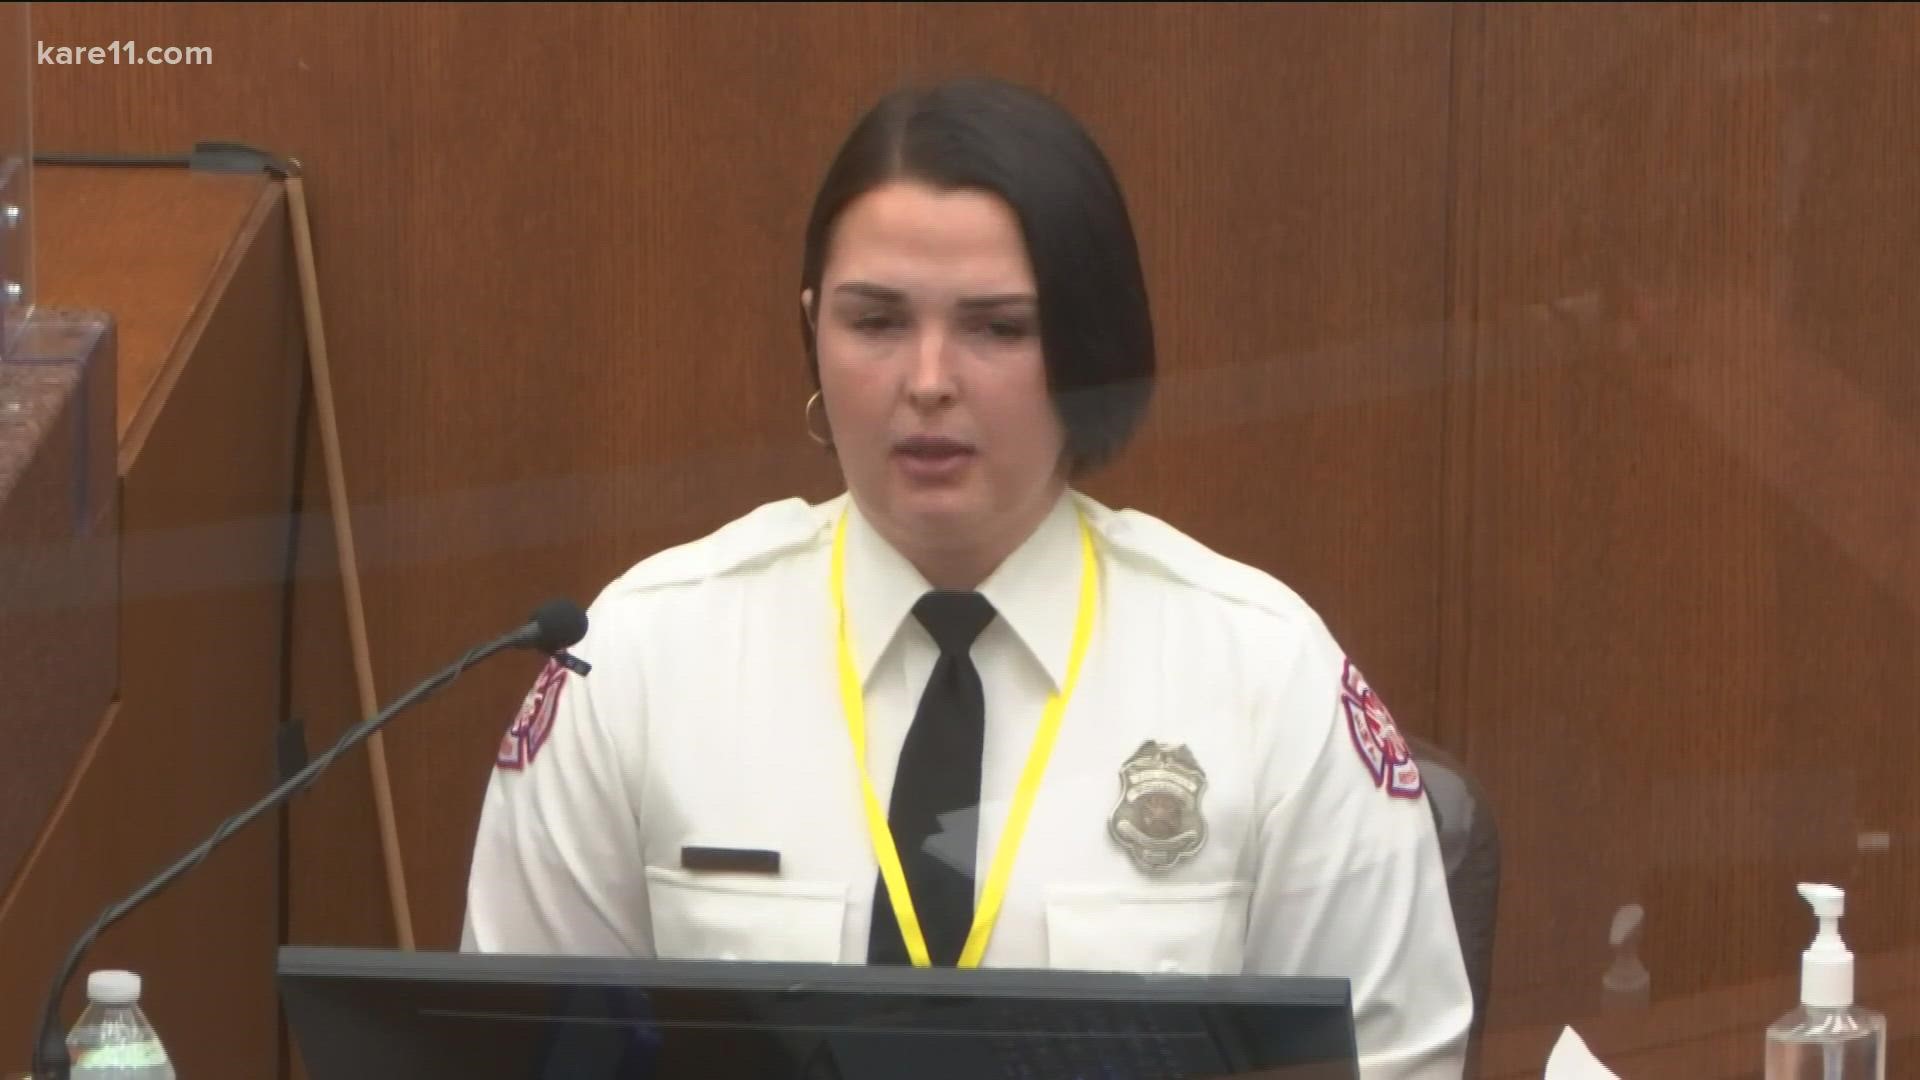 Minneapolis firefighter Genevieve Hansen told the jury that she wanted to provide medical attention to George Floyd, but officers did not allow it.